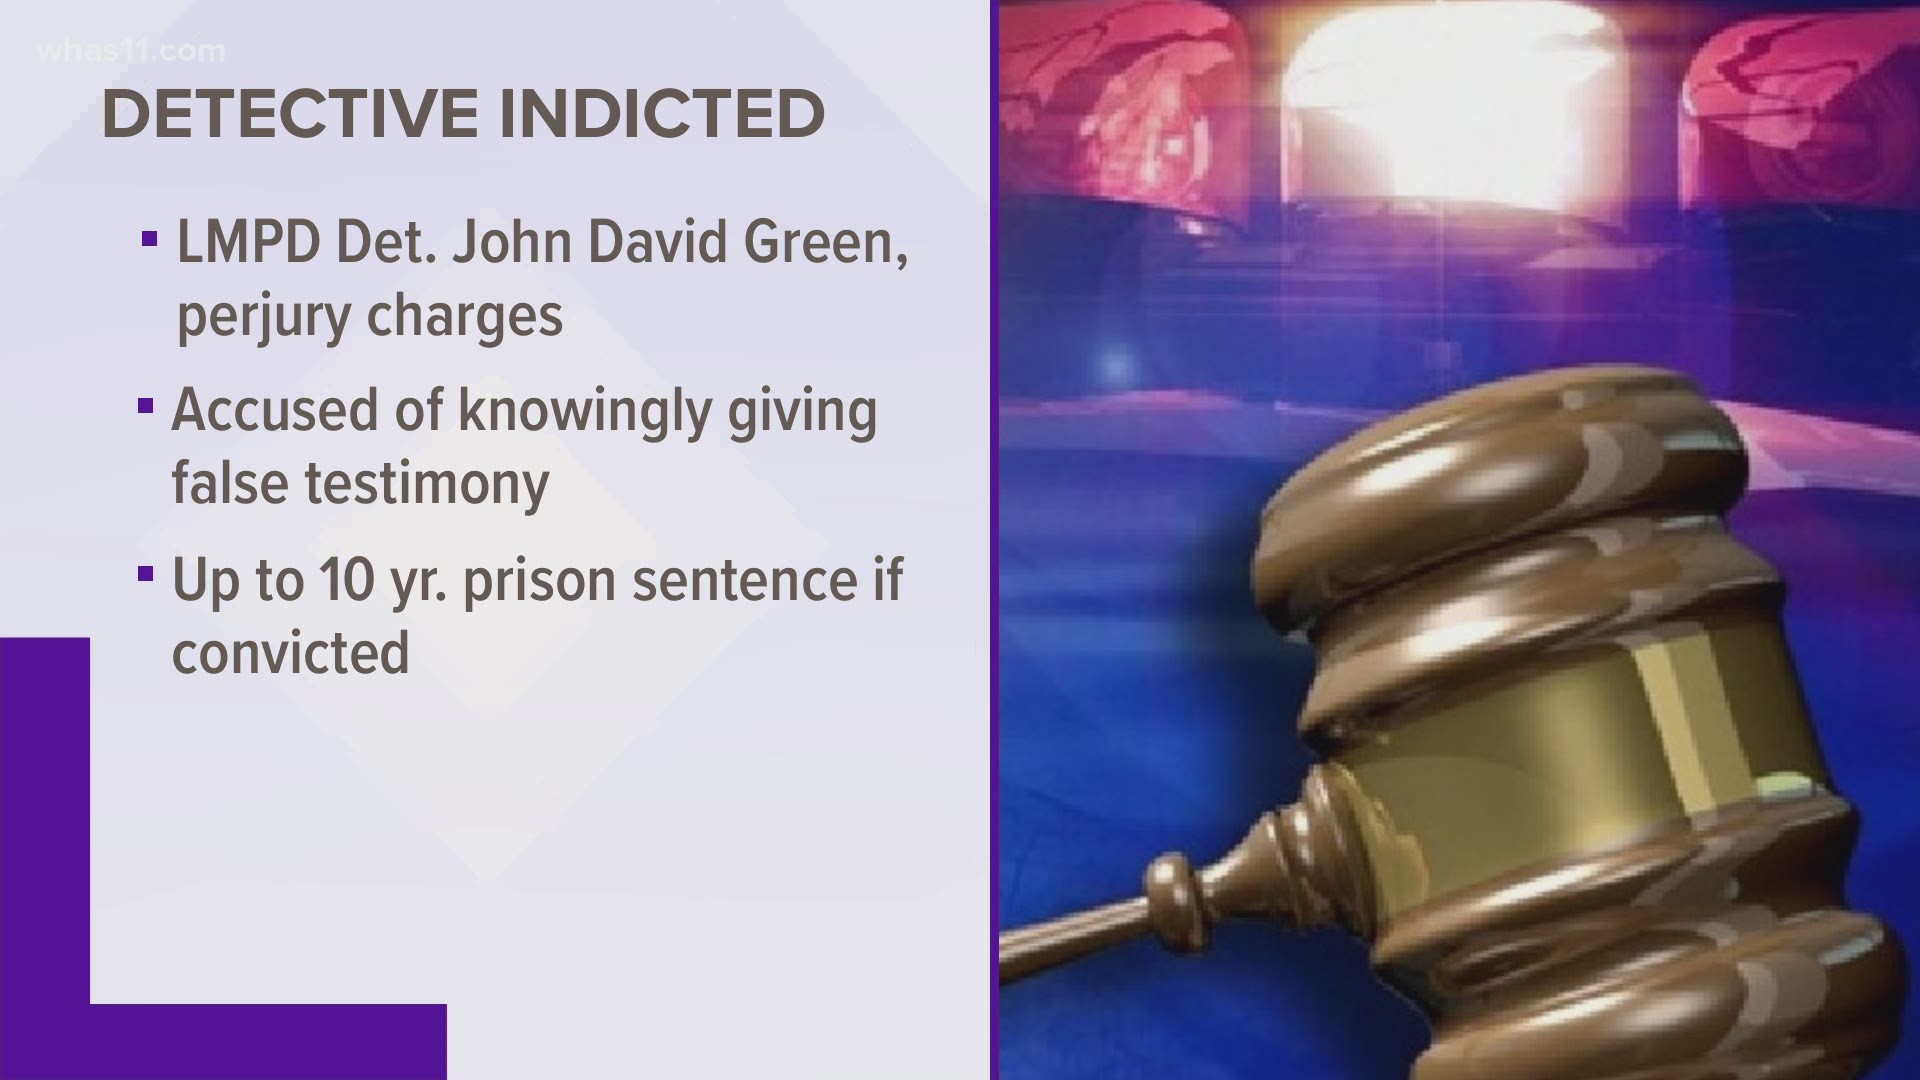 John David Green was indicted after he charged the wrong employee in a 2018 McDonald's theft. Green testified that he reviewed all relevant surveillance video.